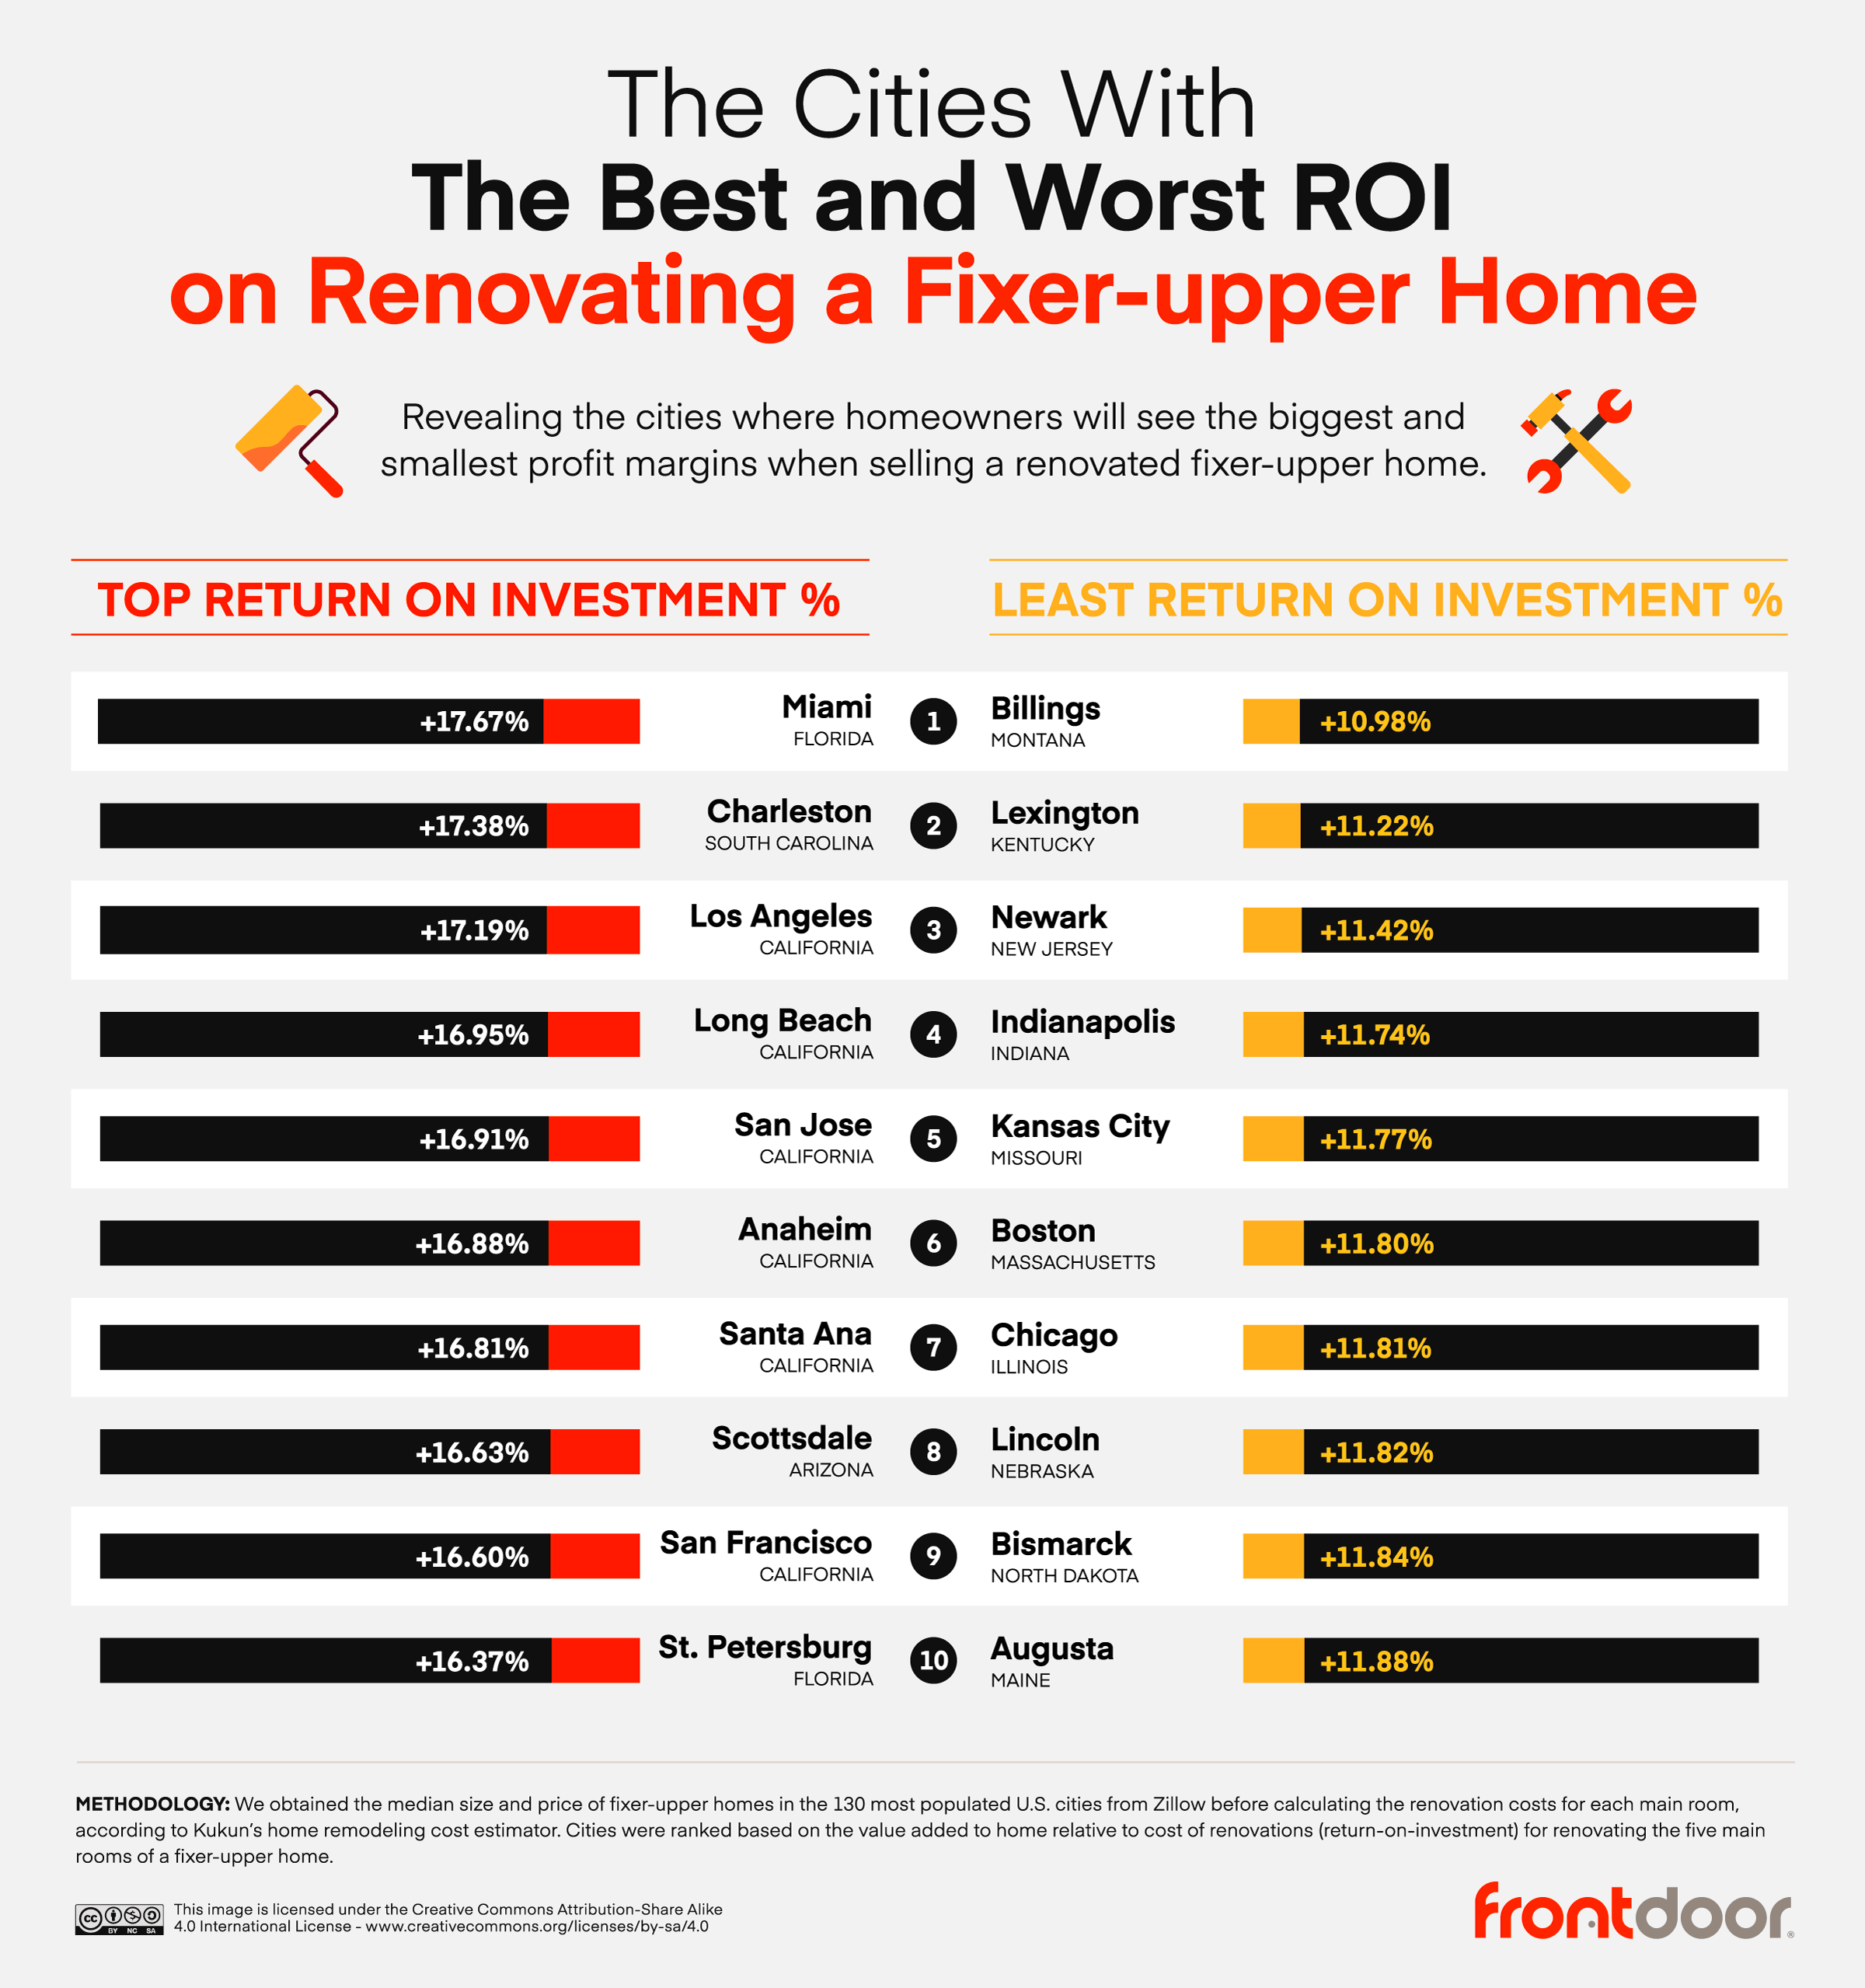 Cities with the best, and worst ROI